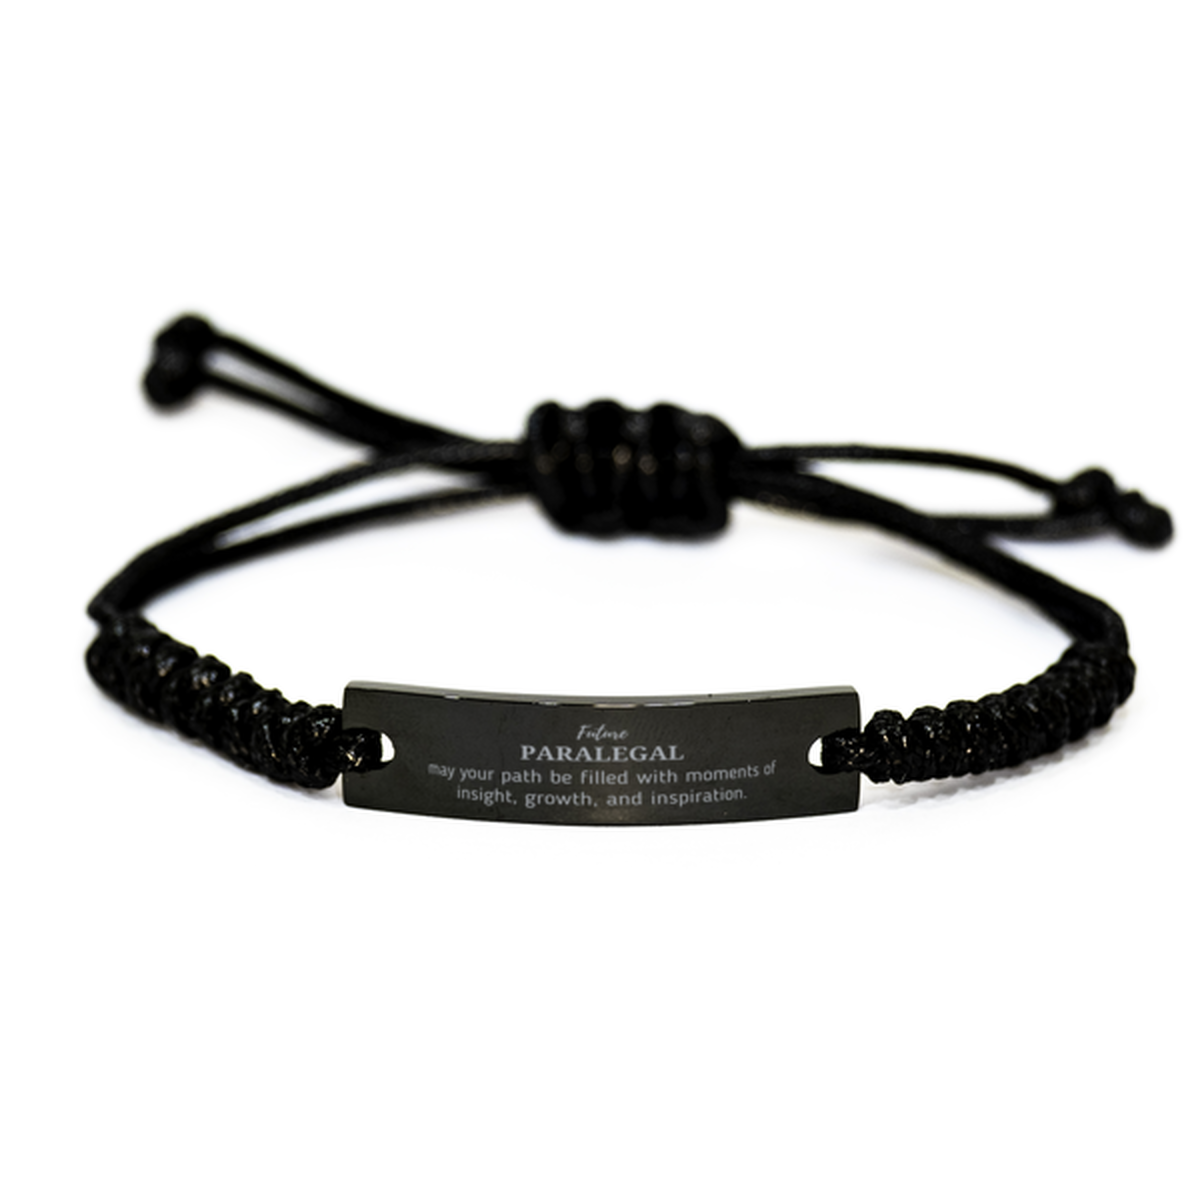 Future Paralegal Gifts, May your path be filled with moments of insight, Graduation Gifts for New Paralegal, Christmas Unique Black Rope Bracelet For Men, Women, Friends